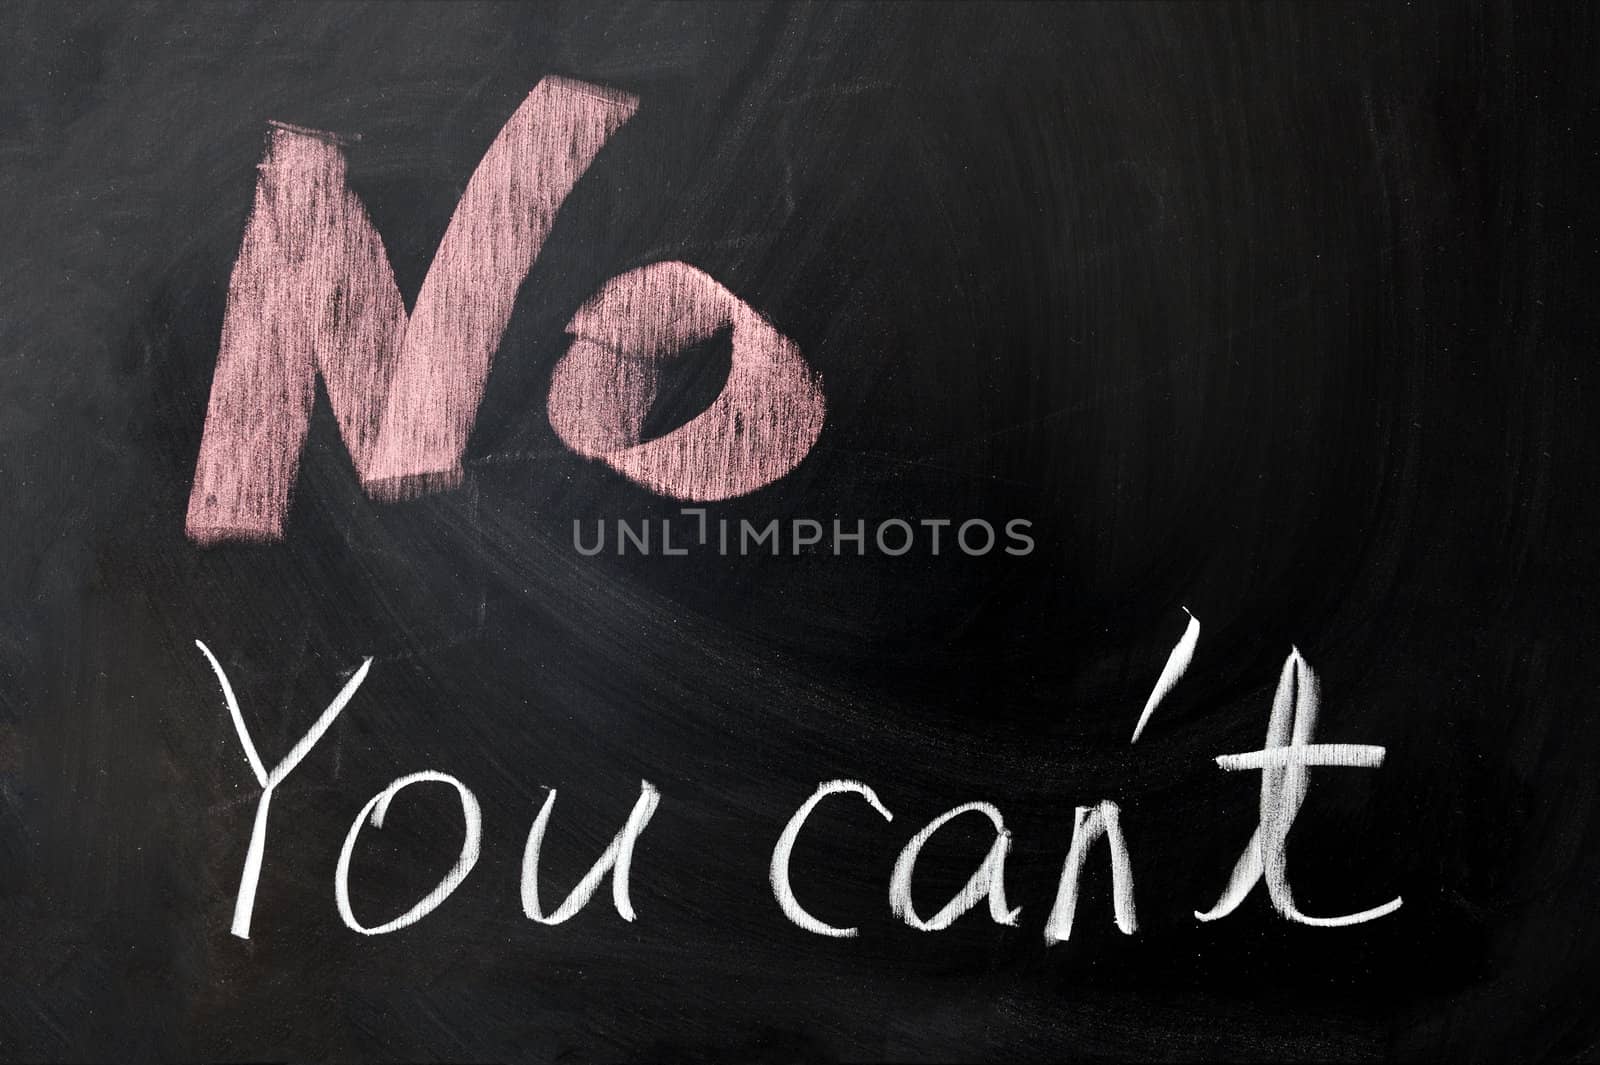 Chalk drawing -"No you can't" written on chalkboard